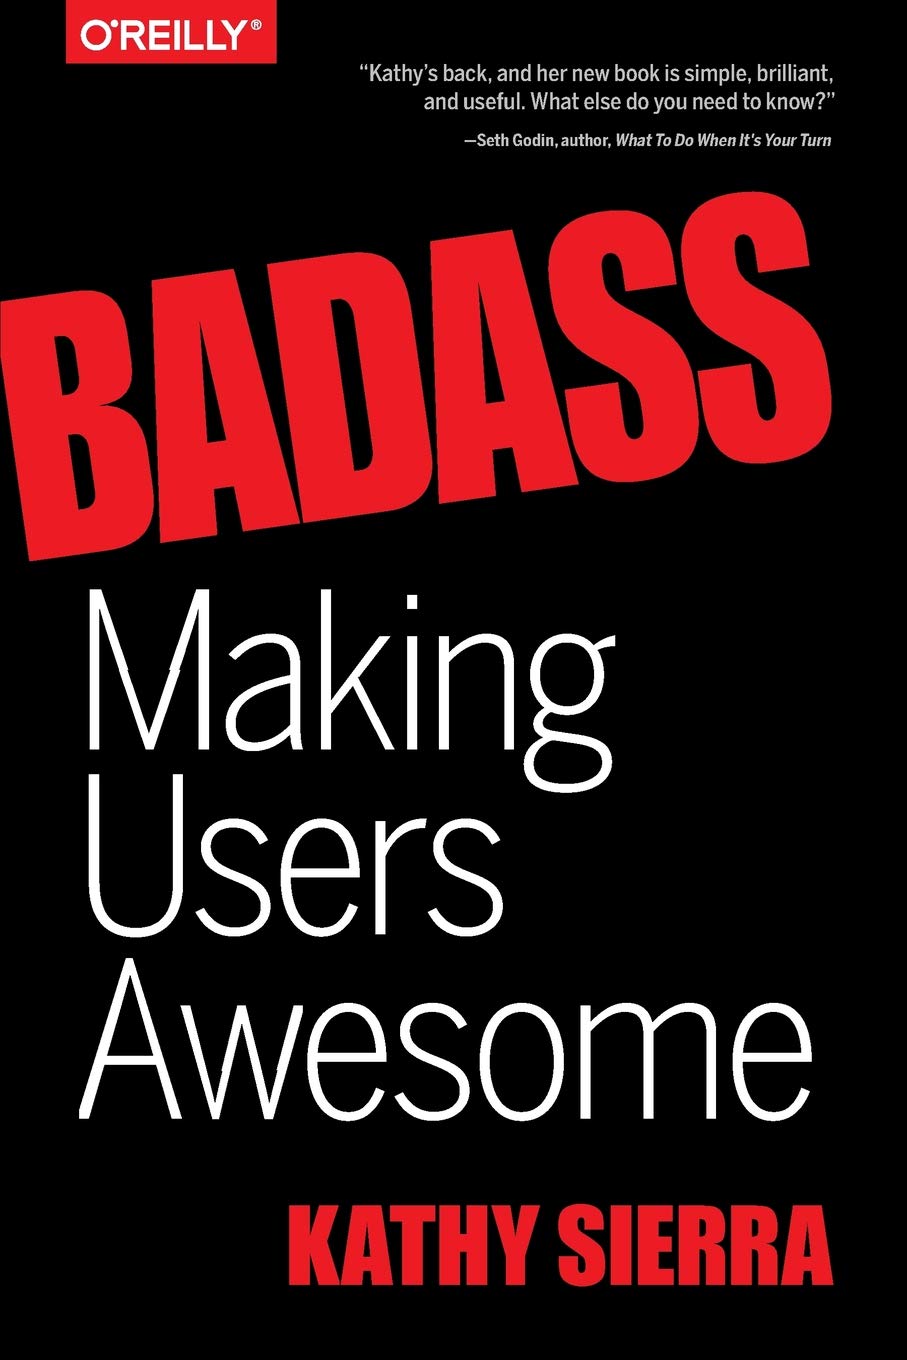 Badass, Making Users Awesome by Kathy Sierra